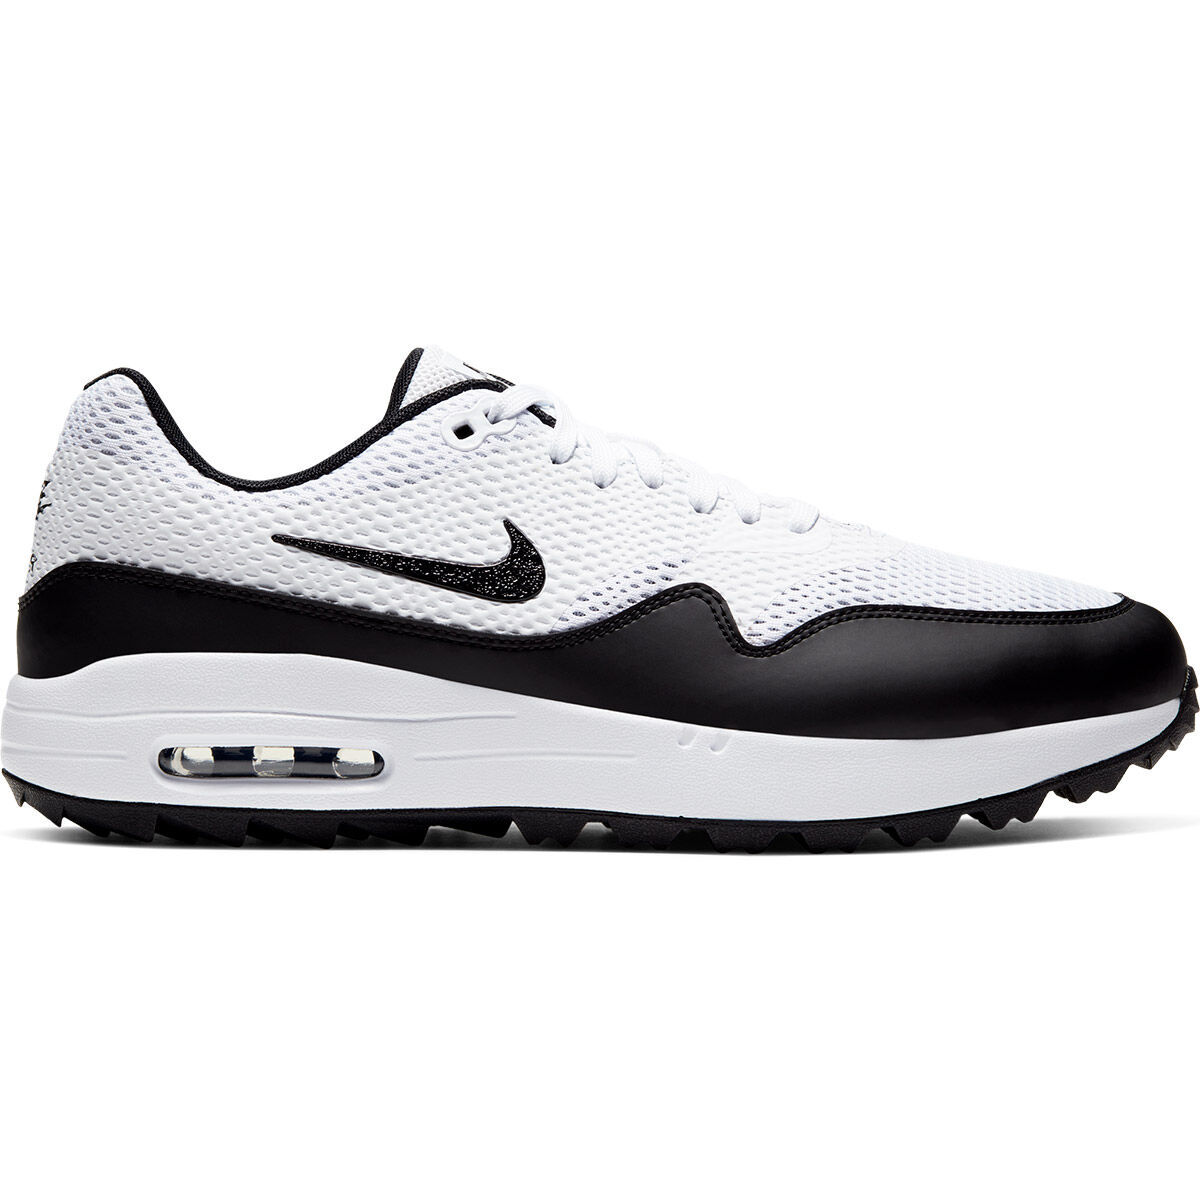 Nike Golf Air Max 1G Shoes 2020 from 